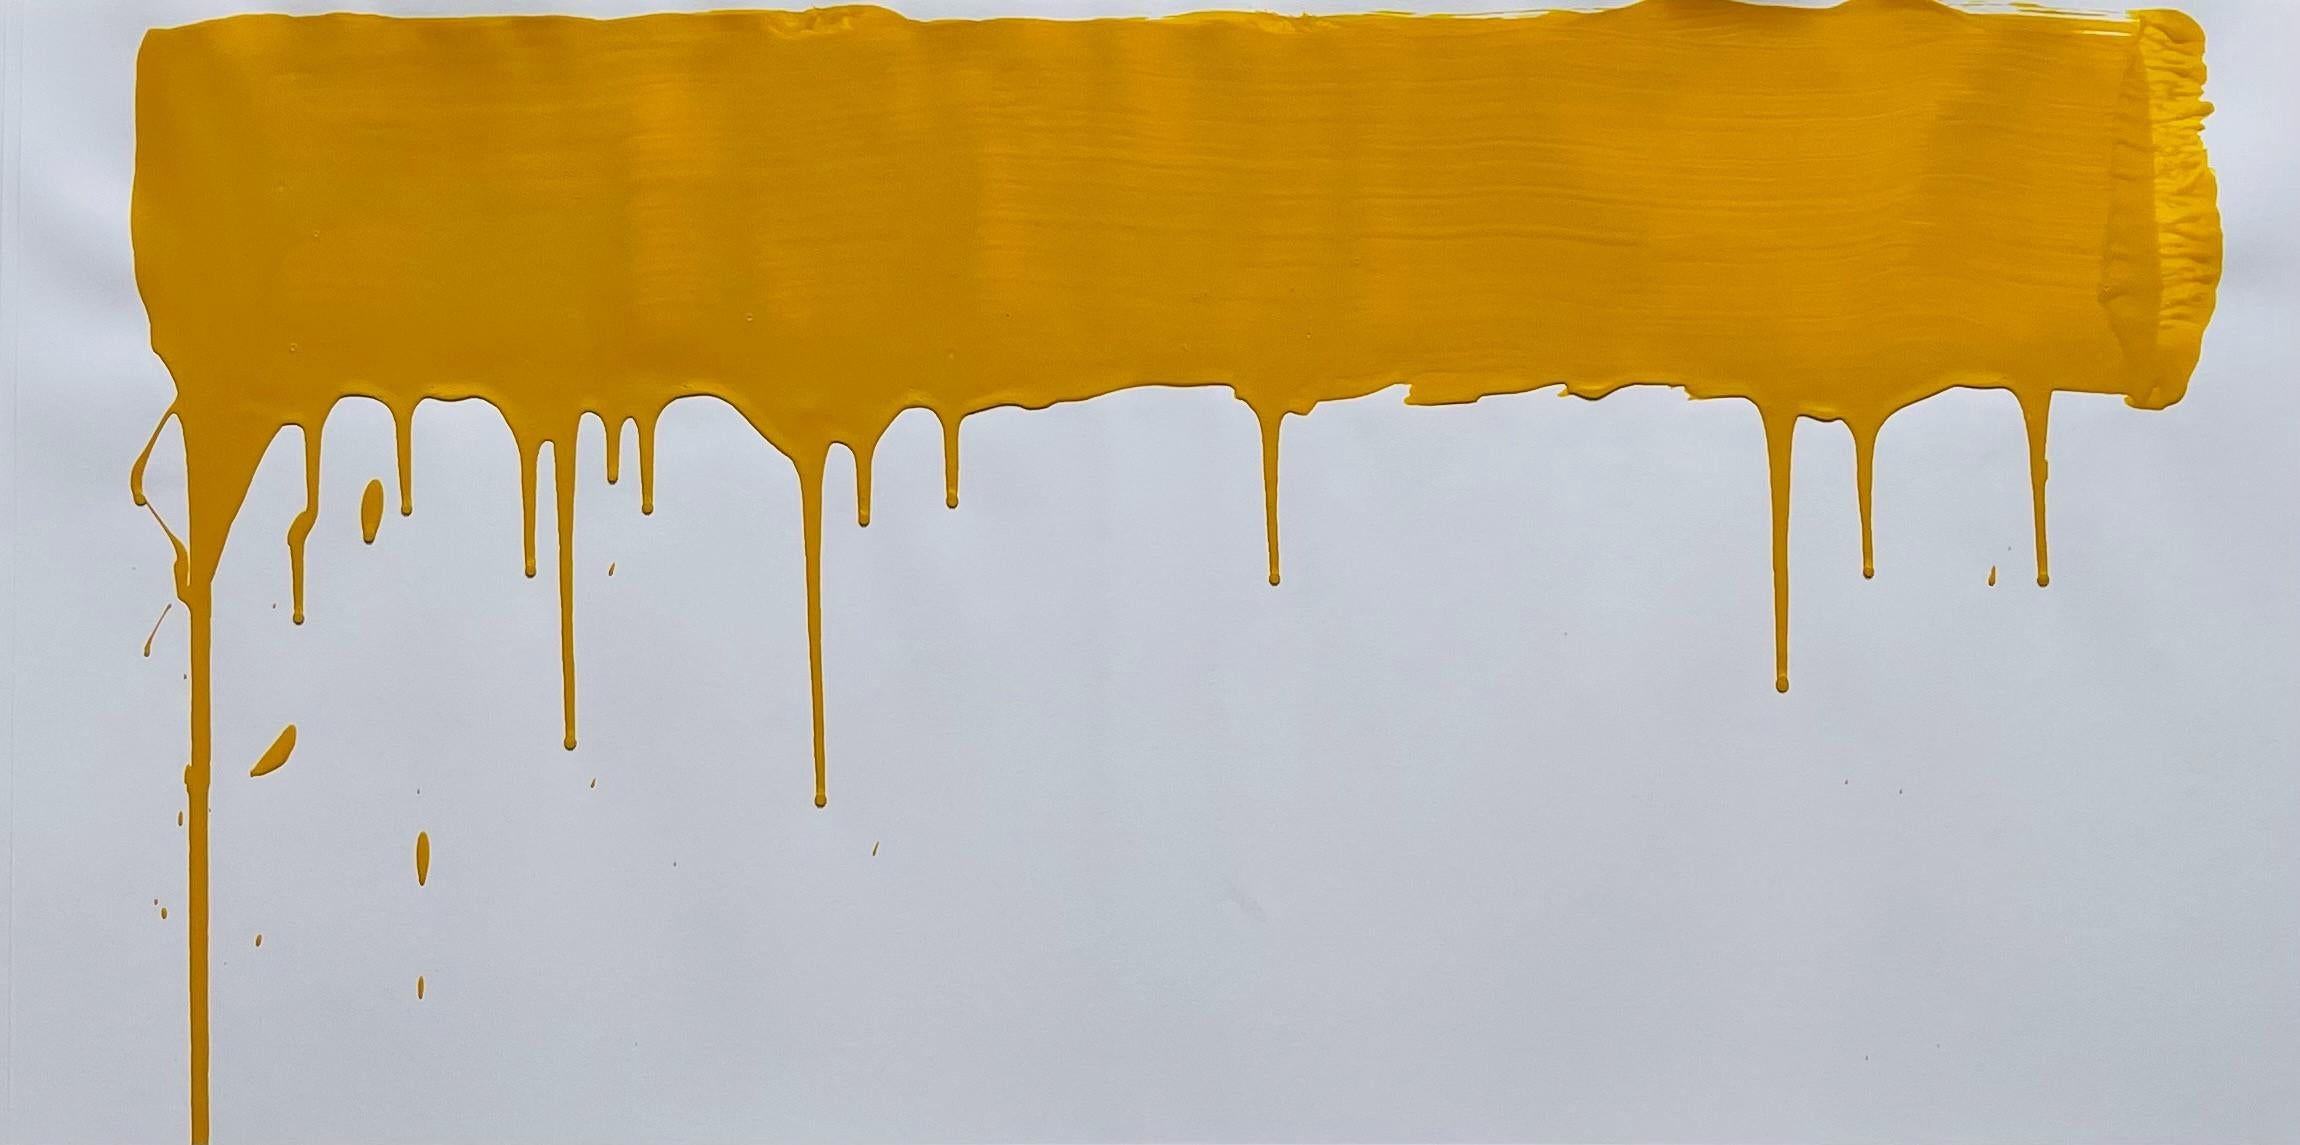 Untitled 2015 (2015) (Yellow) (signed) - Painting by Ai Weiwei